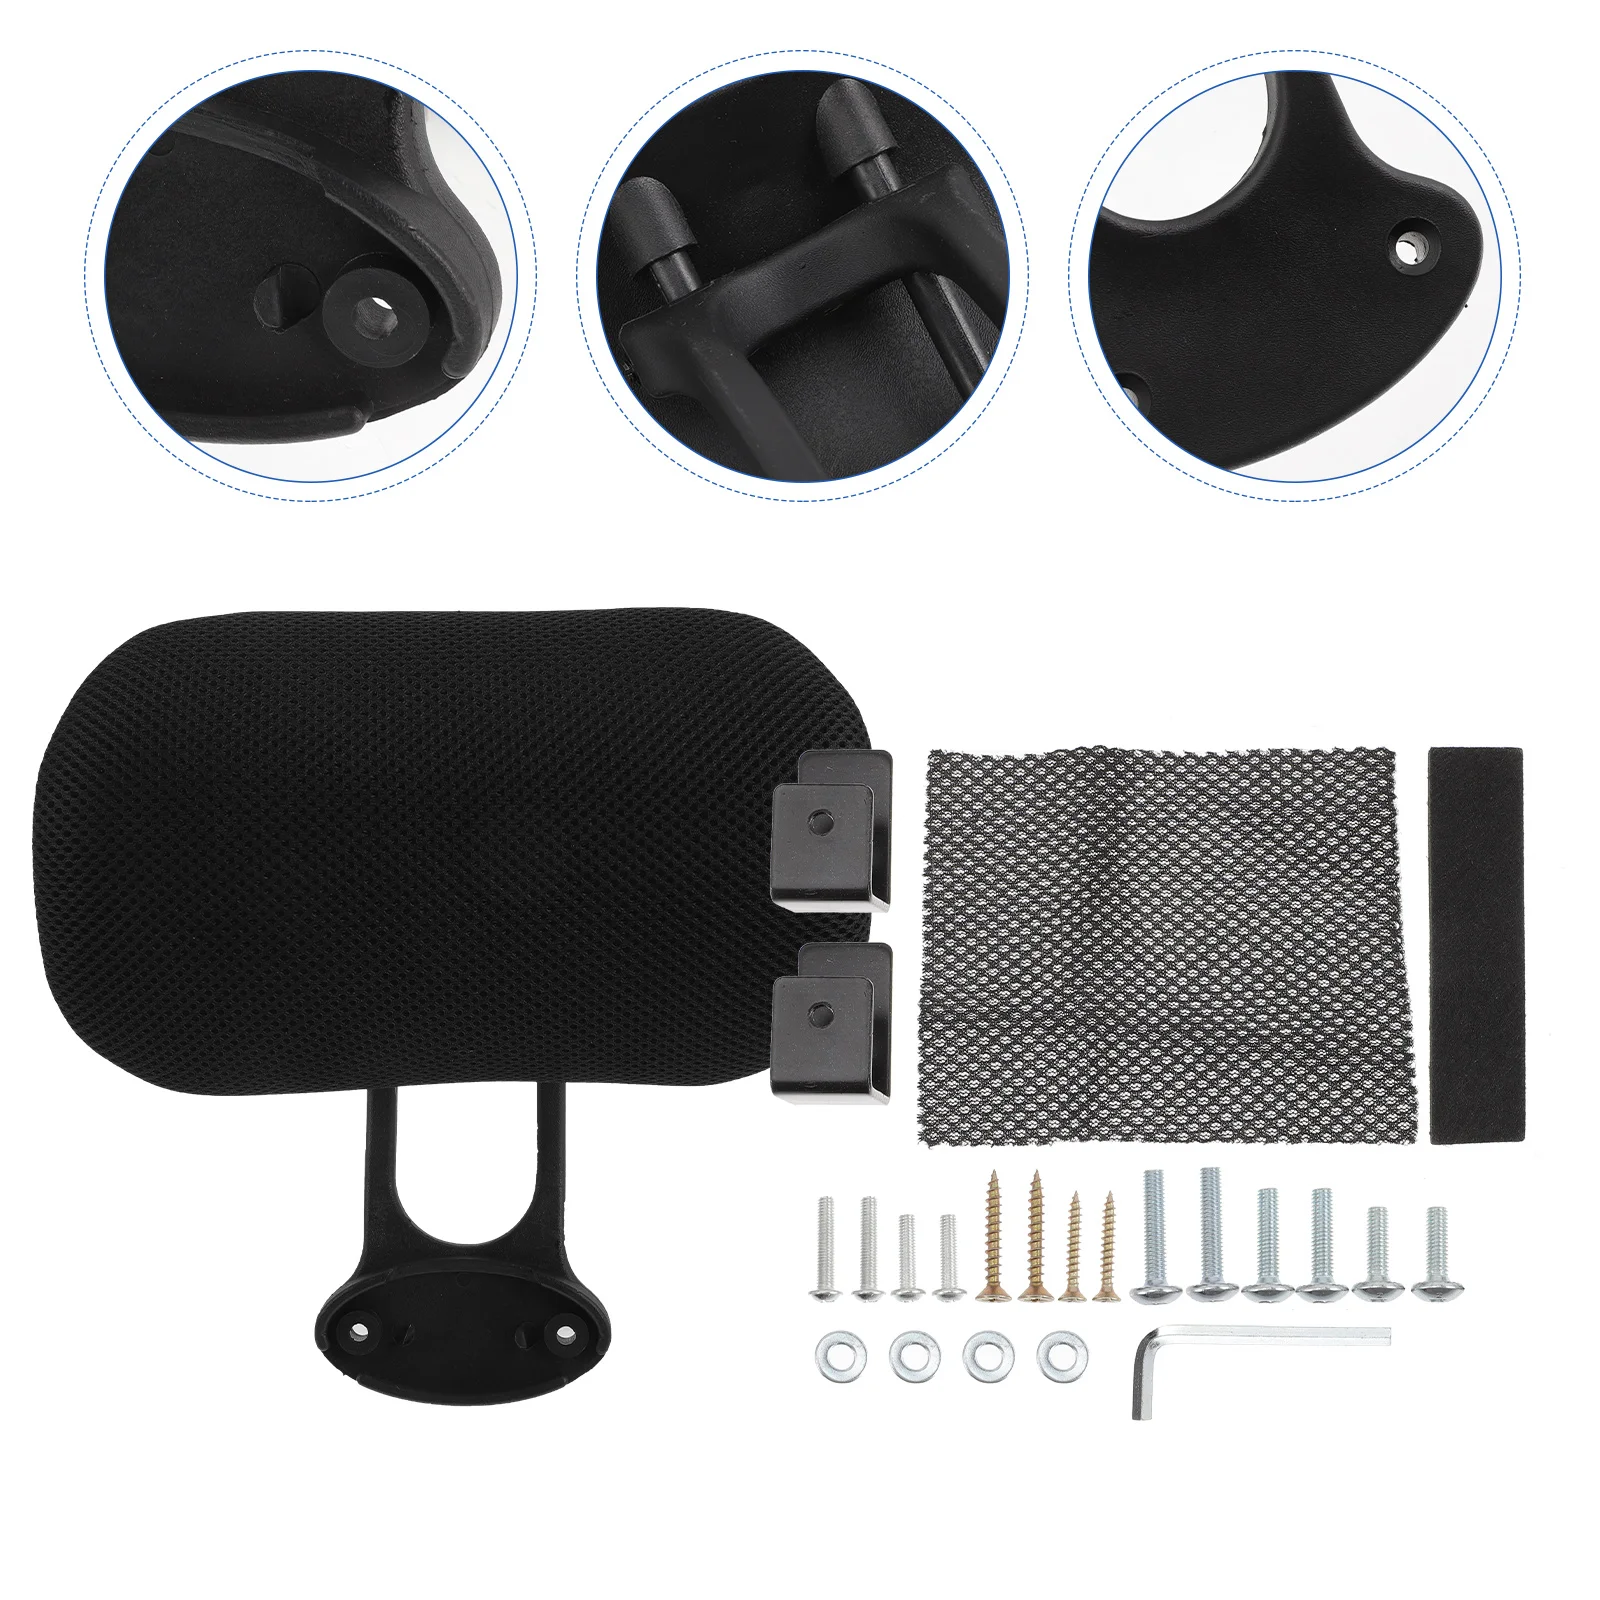 

Chair Headrest Head Computer Pillow Office Attachment Adjustable Neck Work Lift Protection Cushion Support Universal Desk Embody